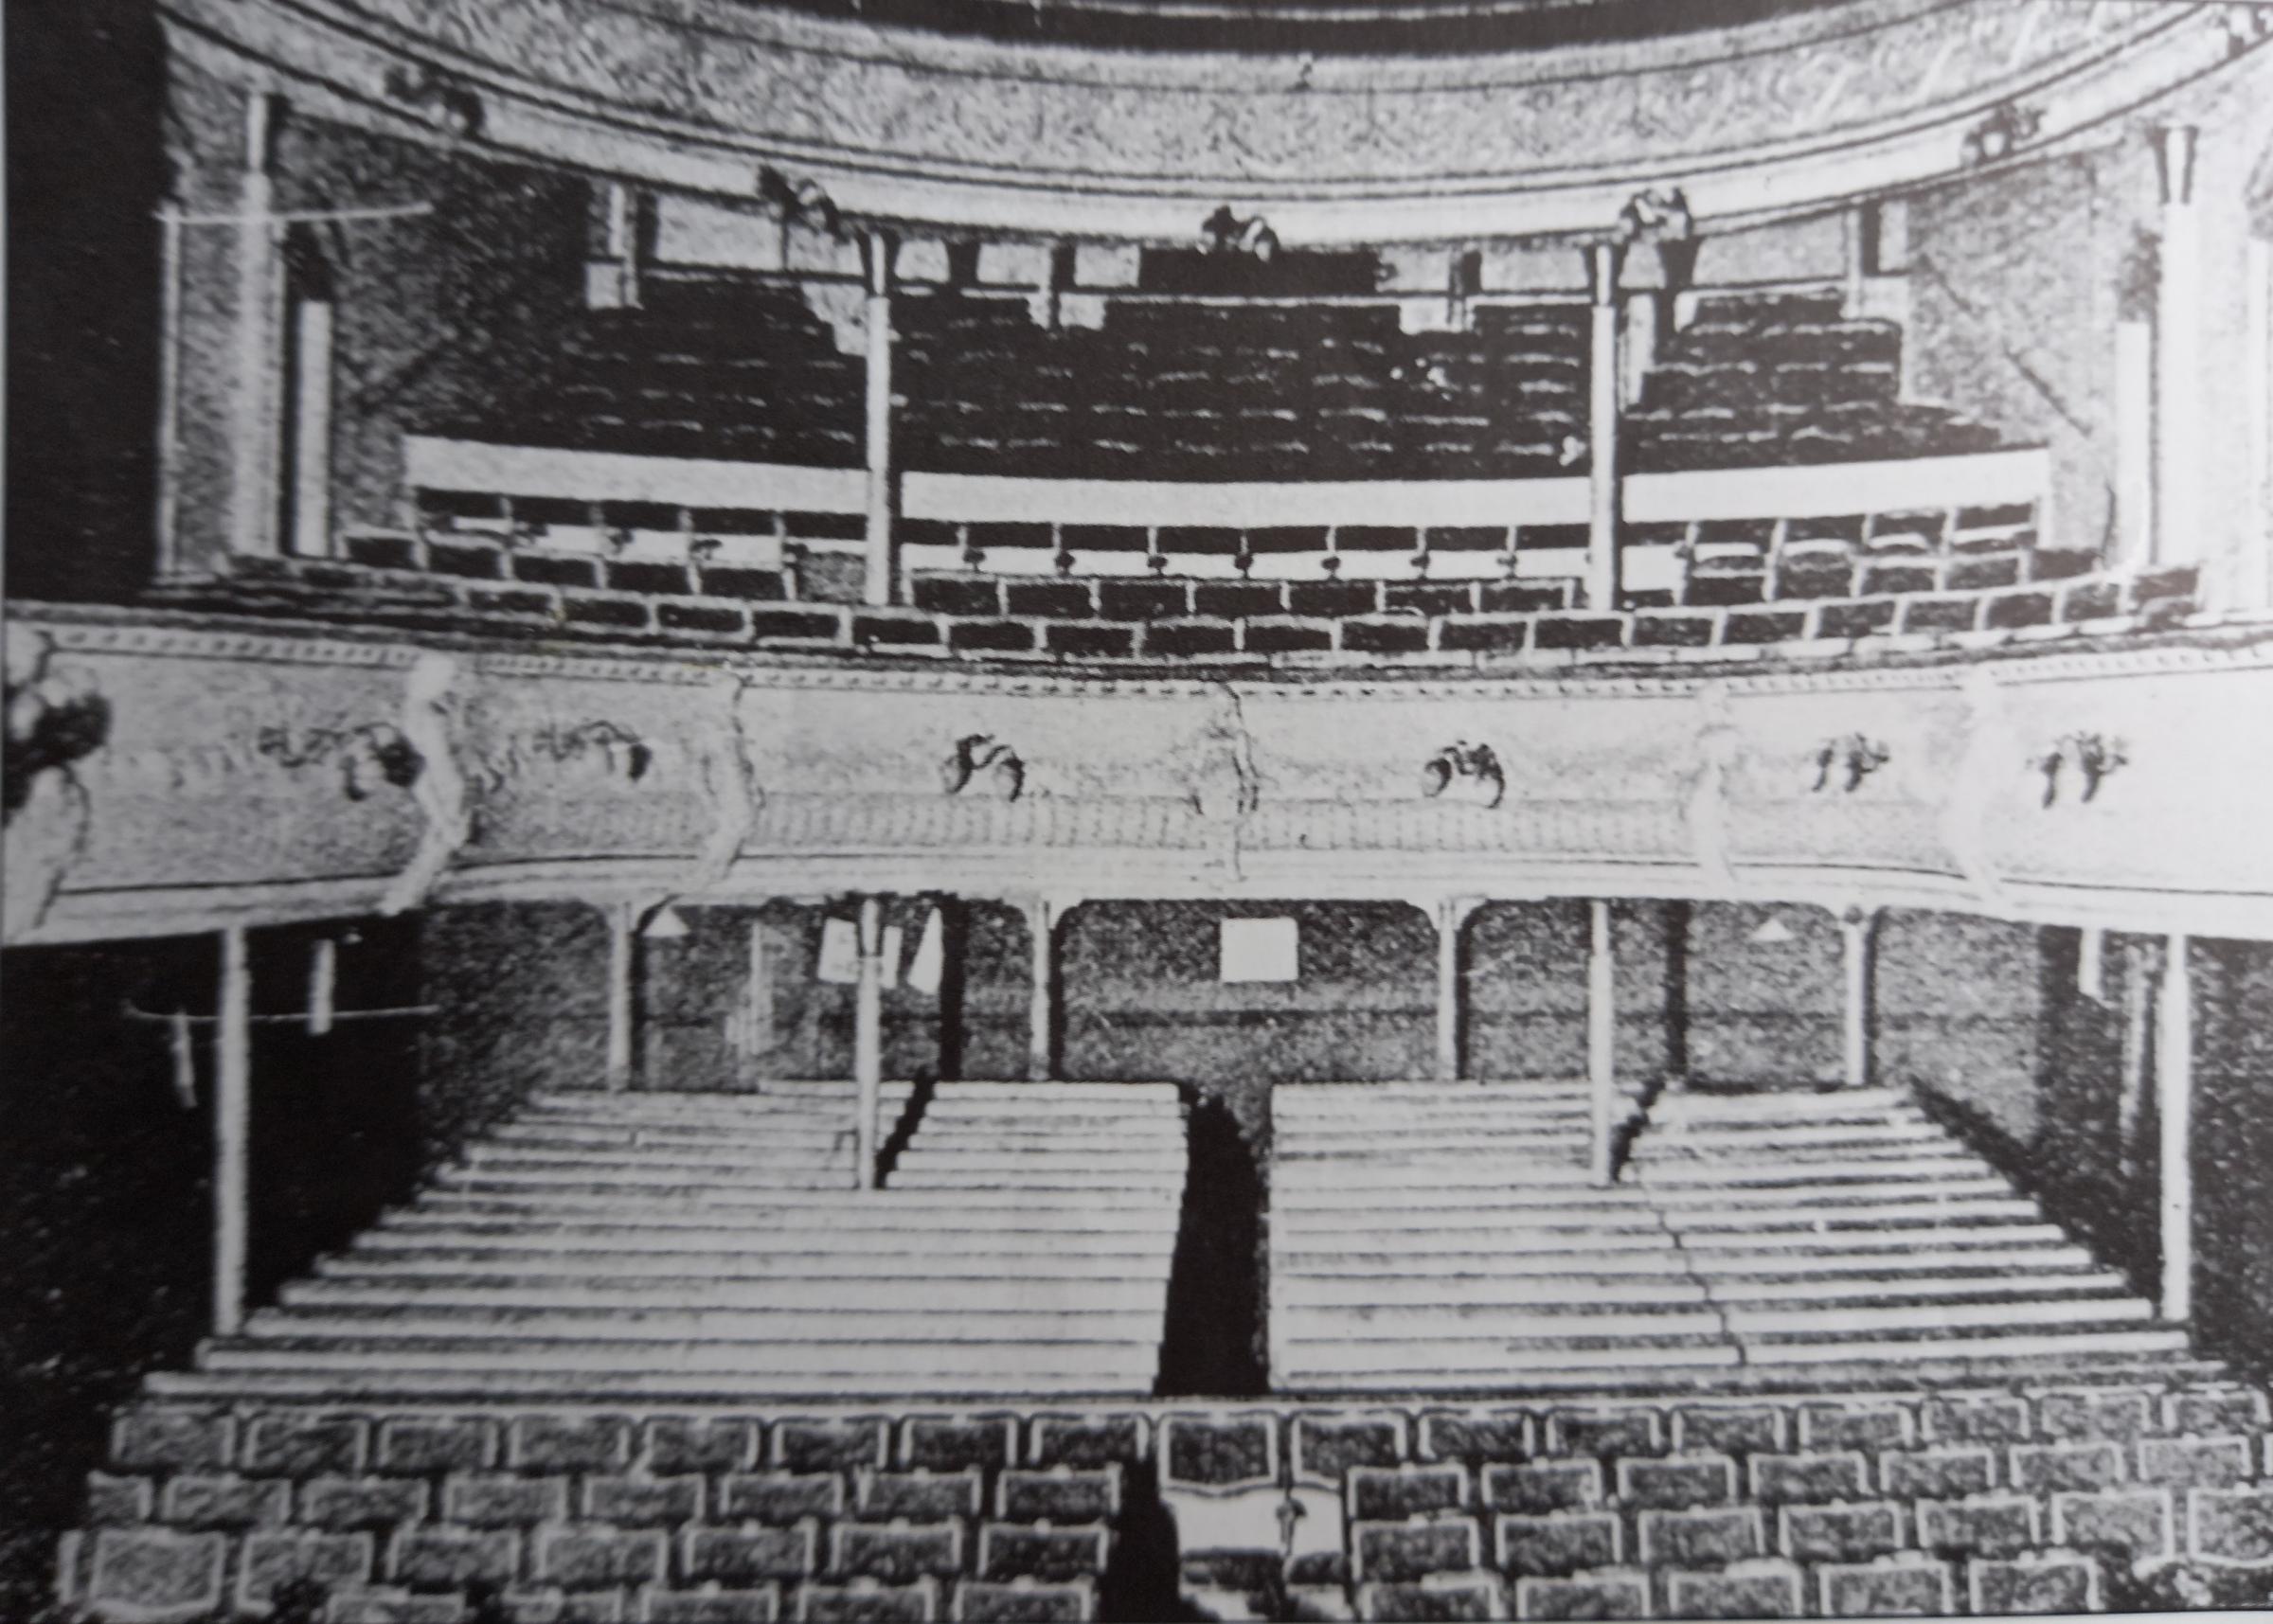 The balcony of the theatre in 1903